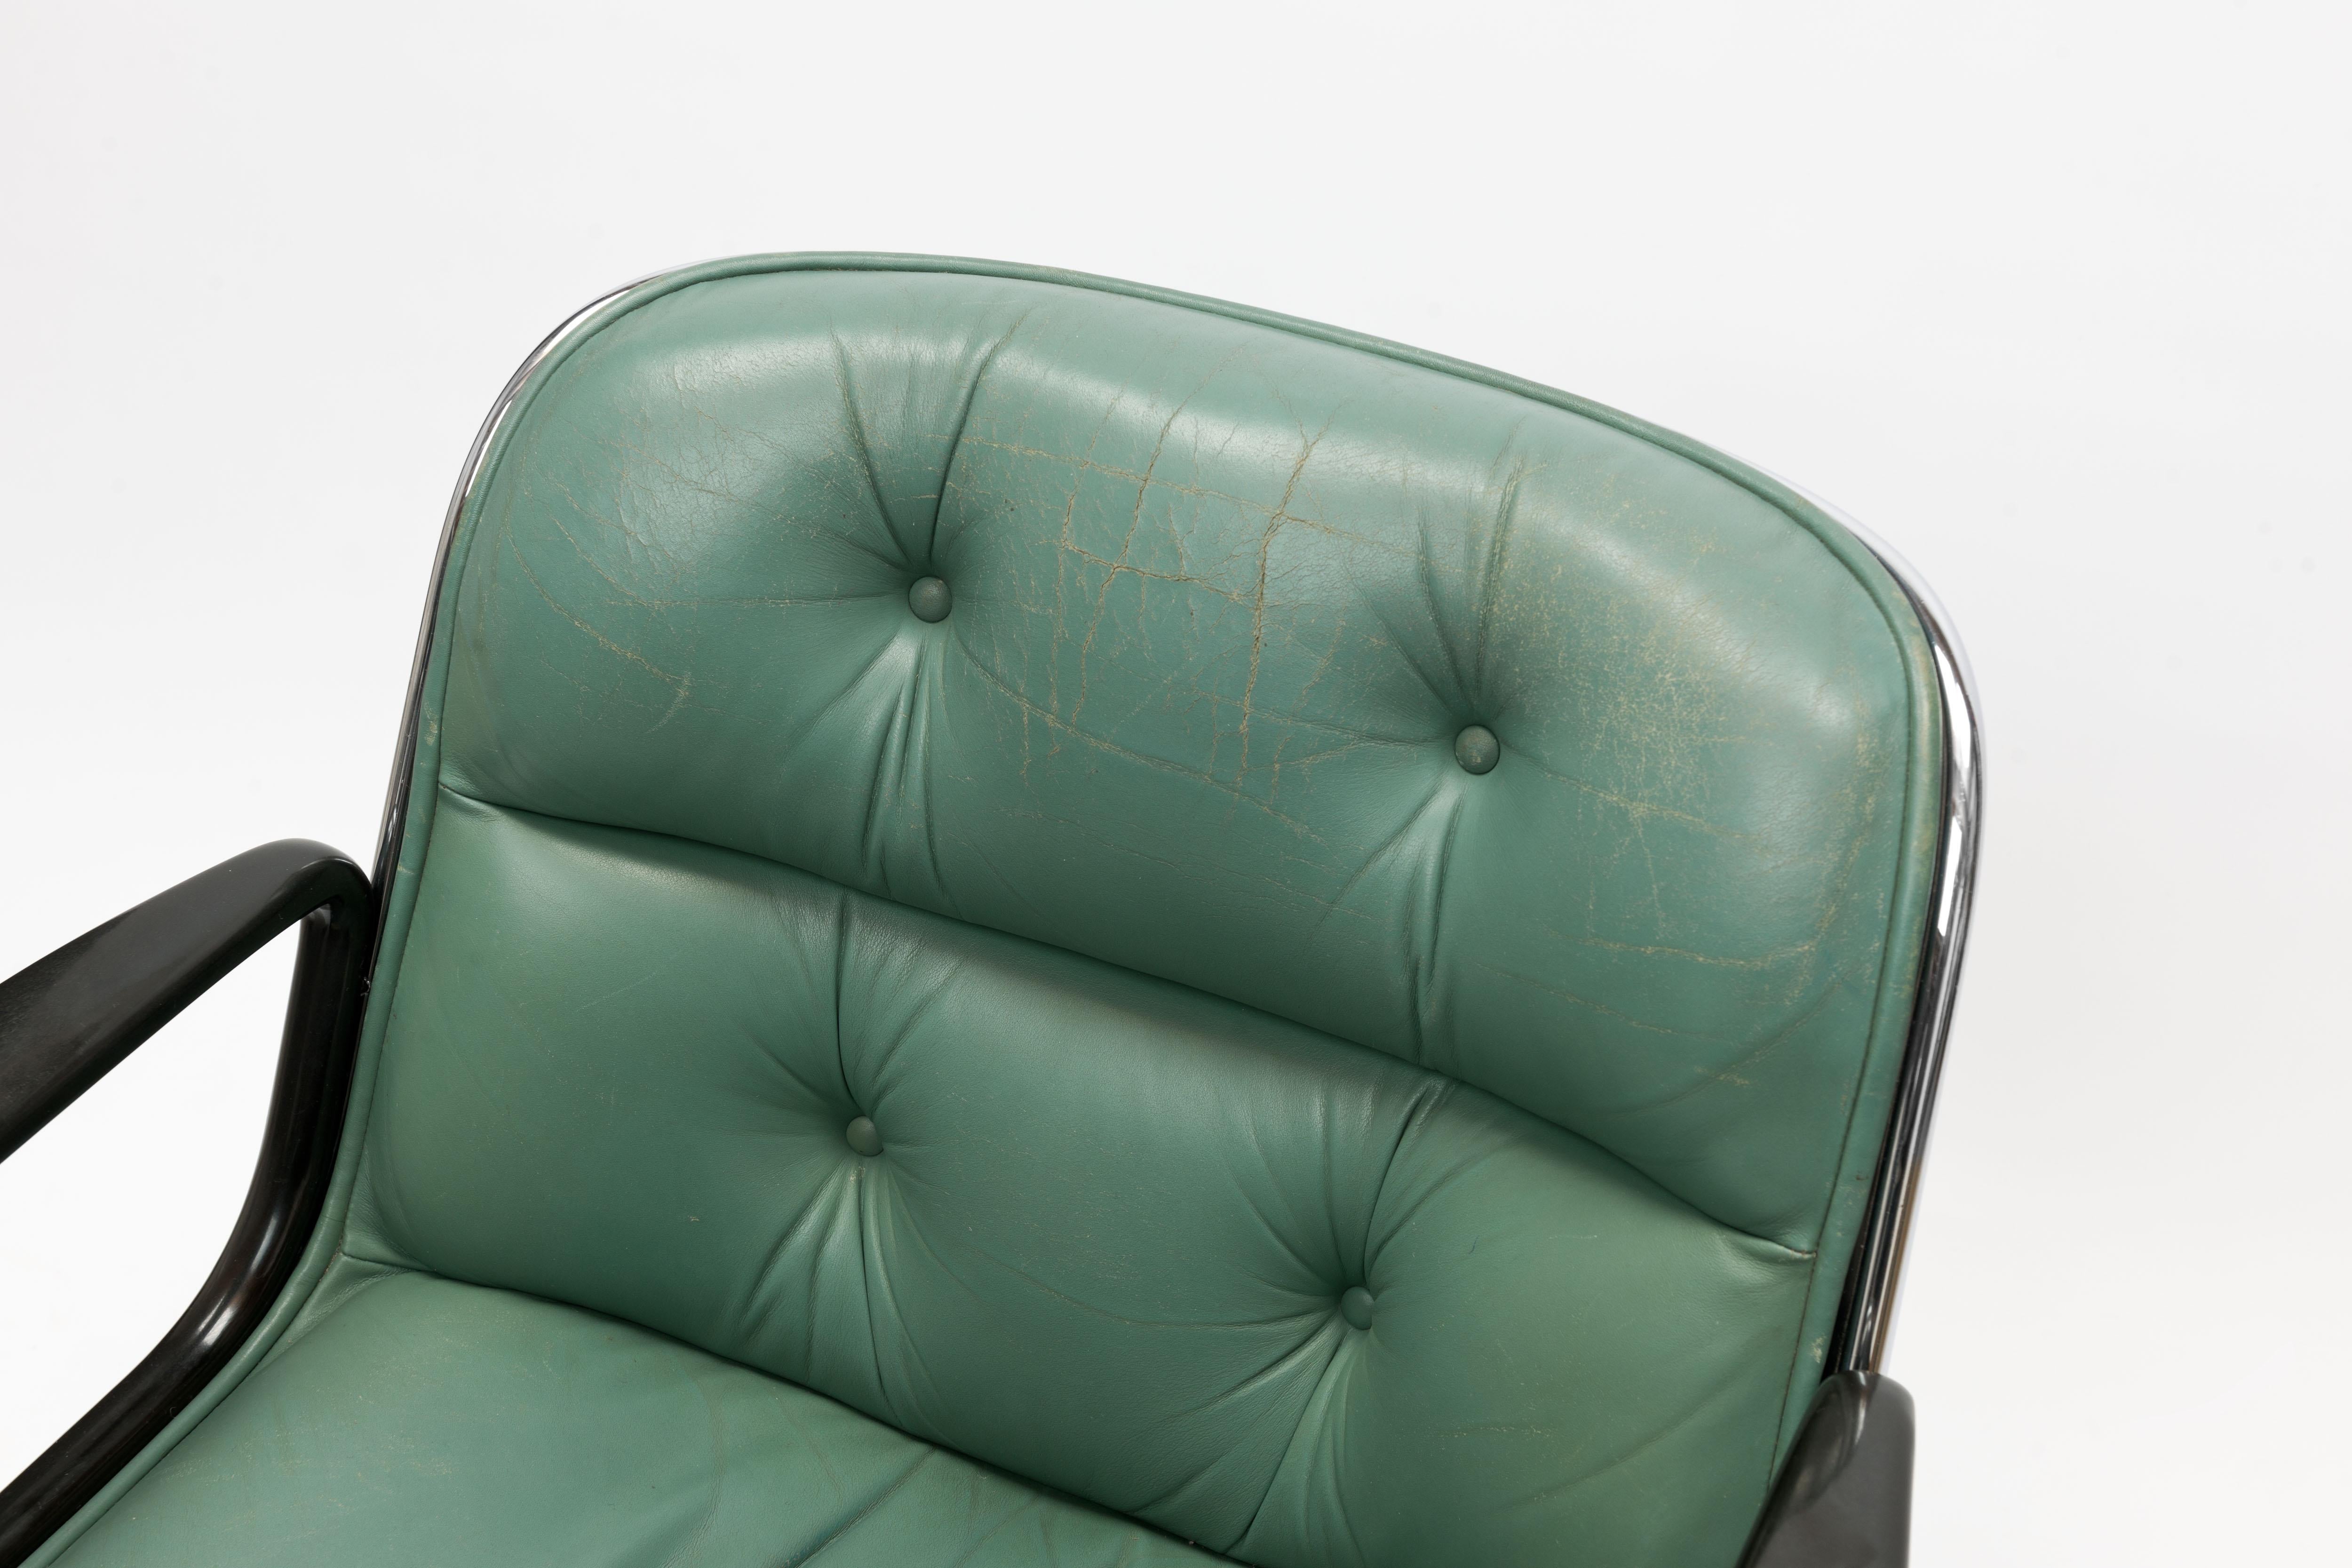 Chrome Charles Pollock Executive Swivel Office Chair in Seafoam Green Leather by Knoll